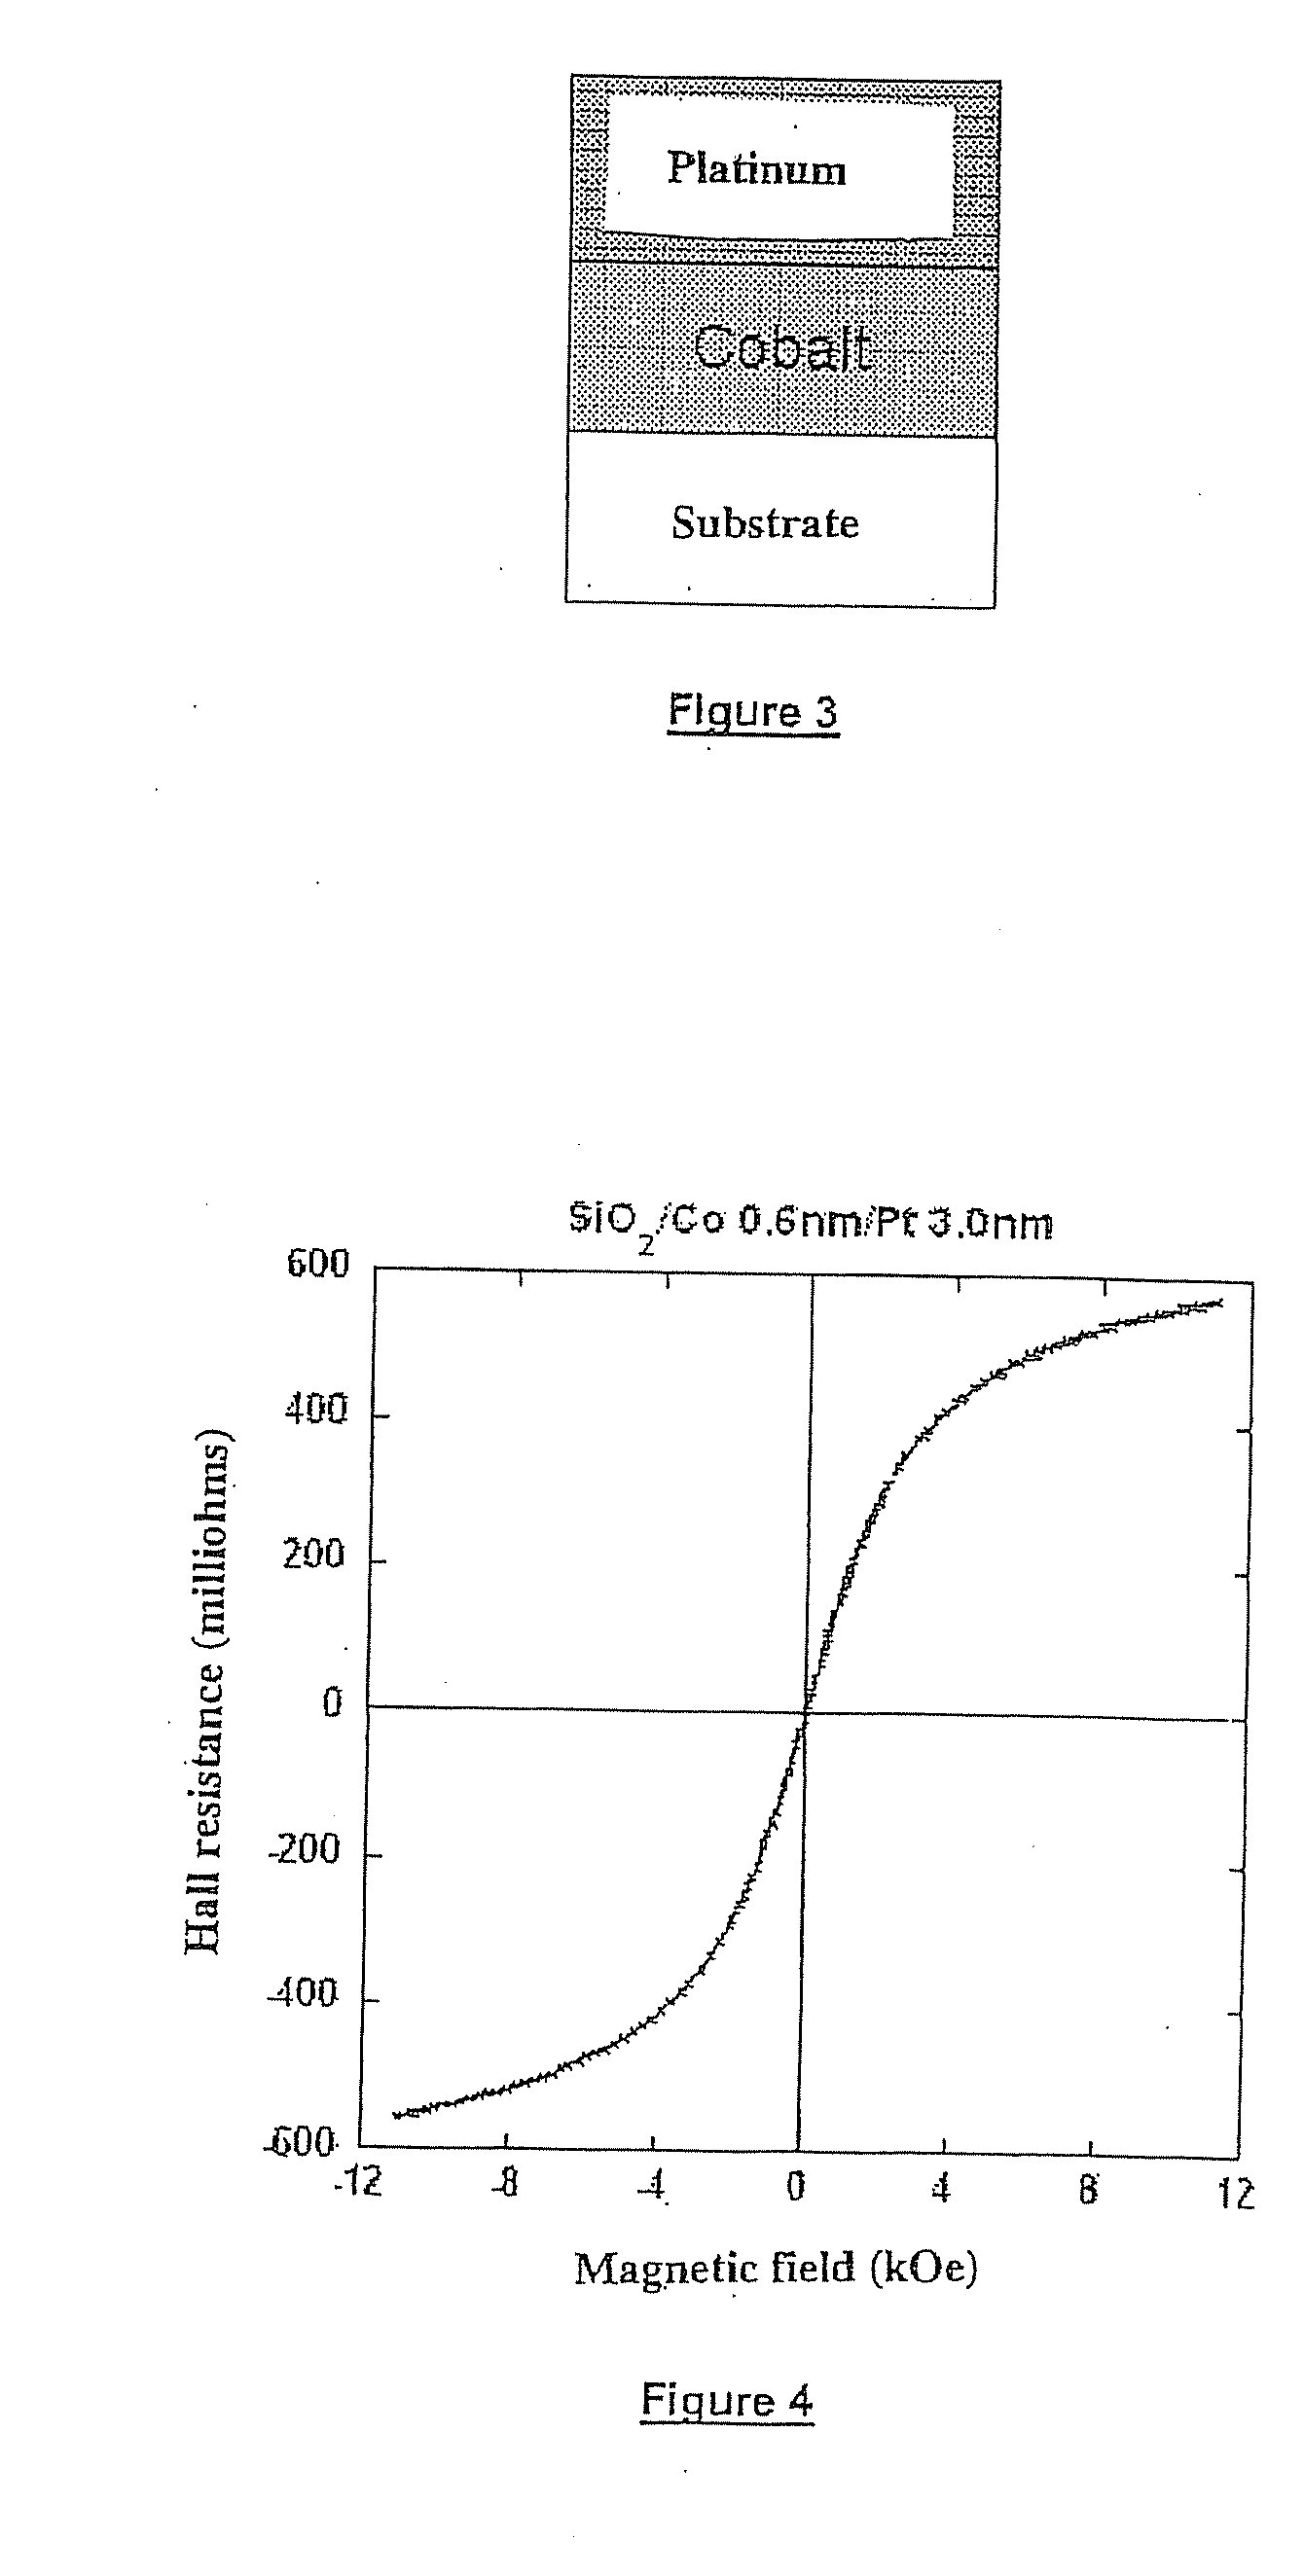 Three-layer magnetic element, method for the production thereof, magnetic field sensor, magnetic memory, and magnetic logic gate using such an element